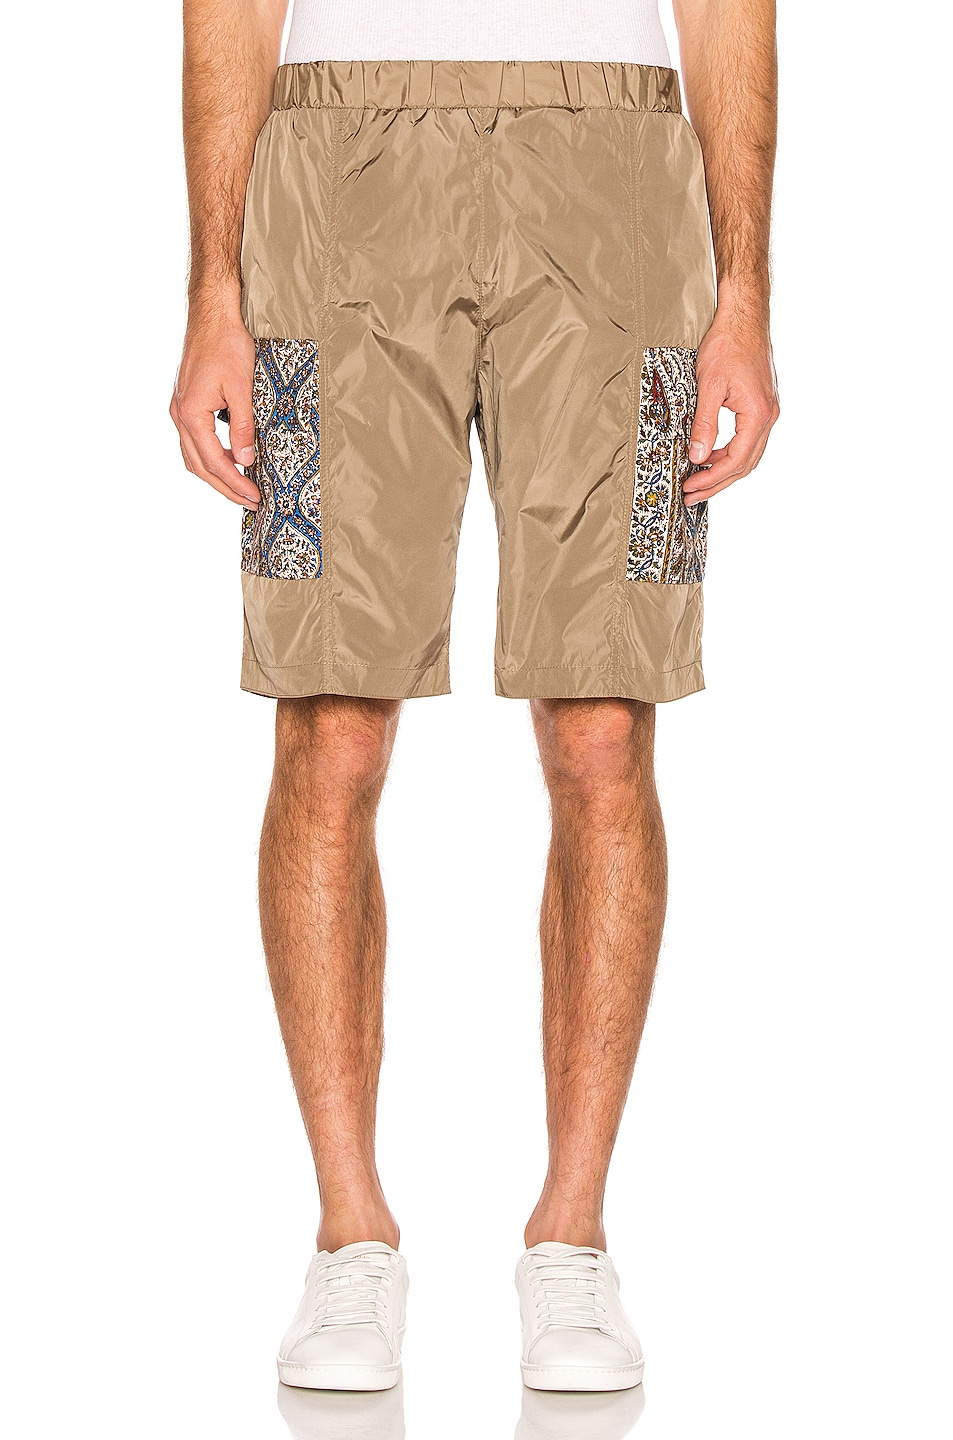 Renewal Contrast Patch Pocket Short in Neutral,Paisley